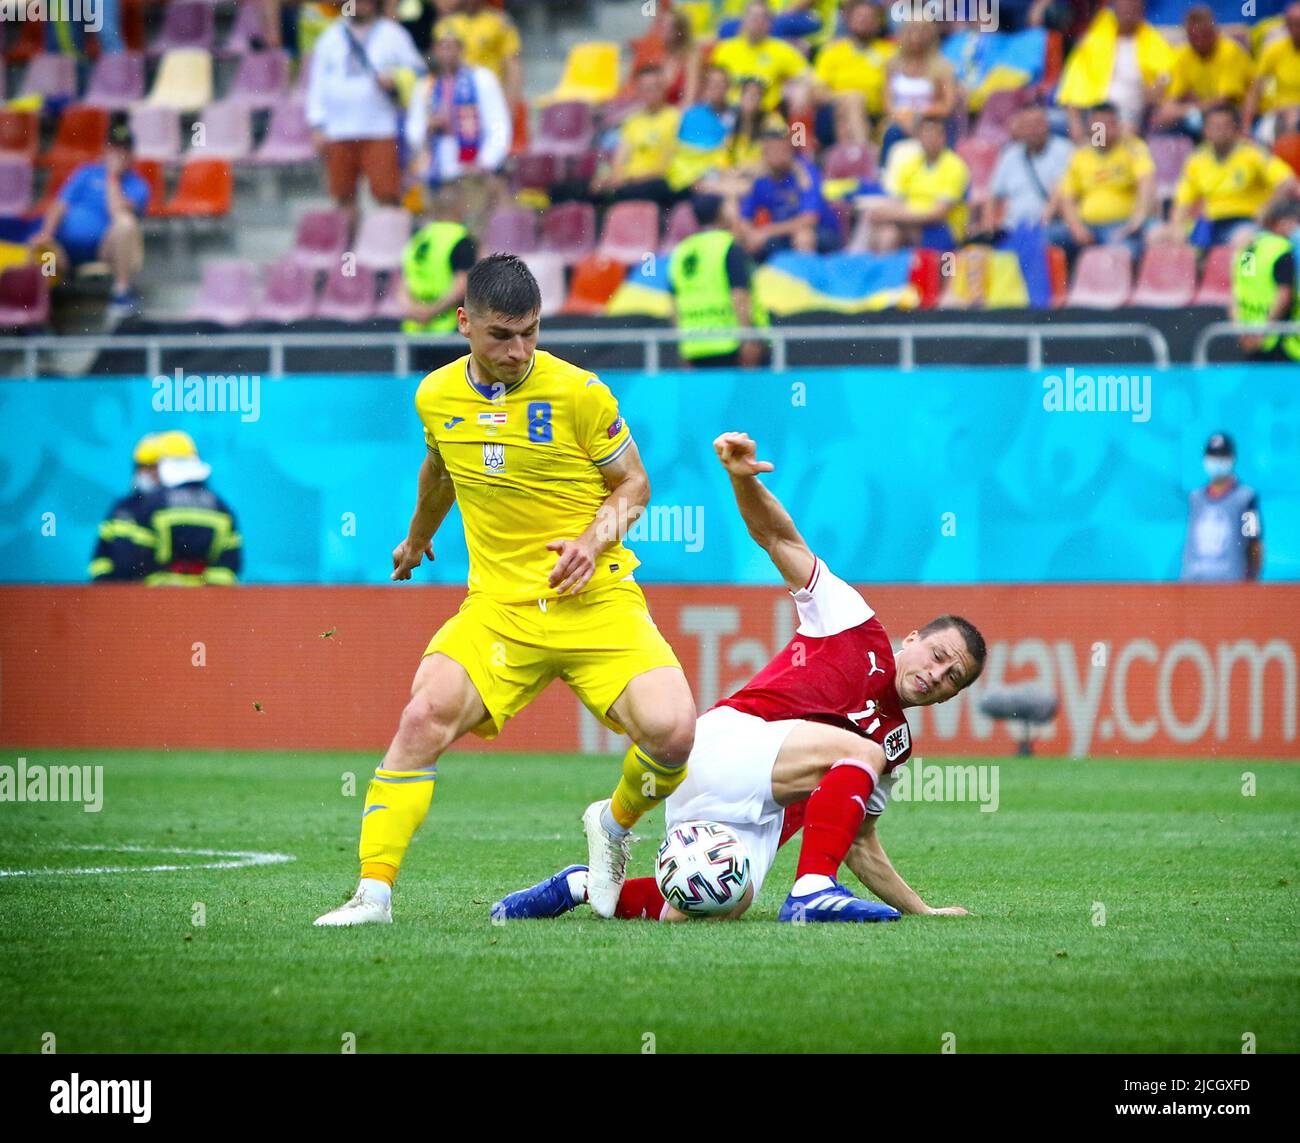 BUCHAREST, ROMANIA - JUNE 21, 2021: Ruslan Malinovskyi of Ukraine (L) fights for a ball with Stefan Lainer of Austria during their UEFA EURO 2020 game at National Arena Bucharest stadium Stock Photo